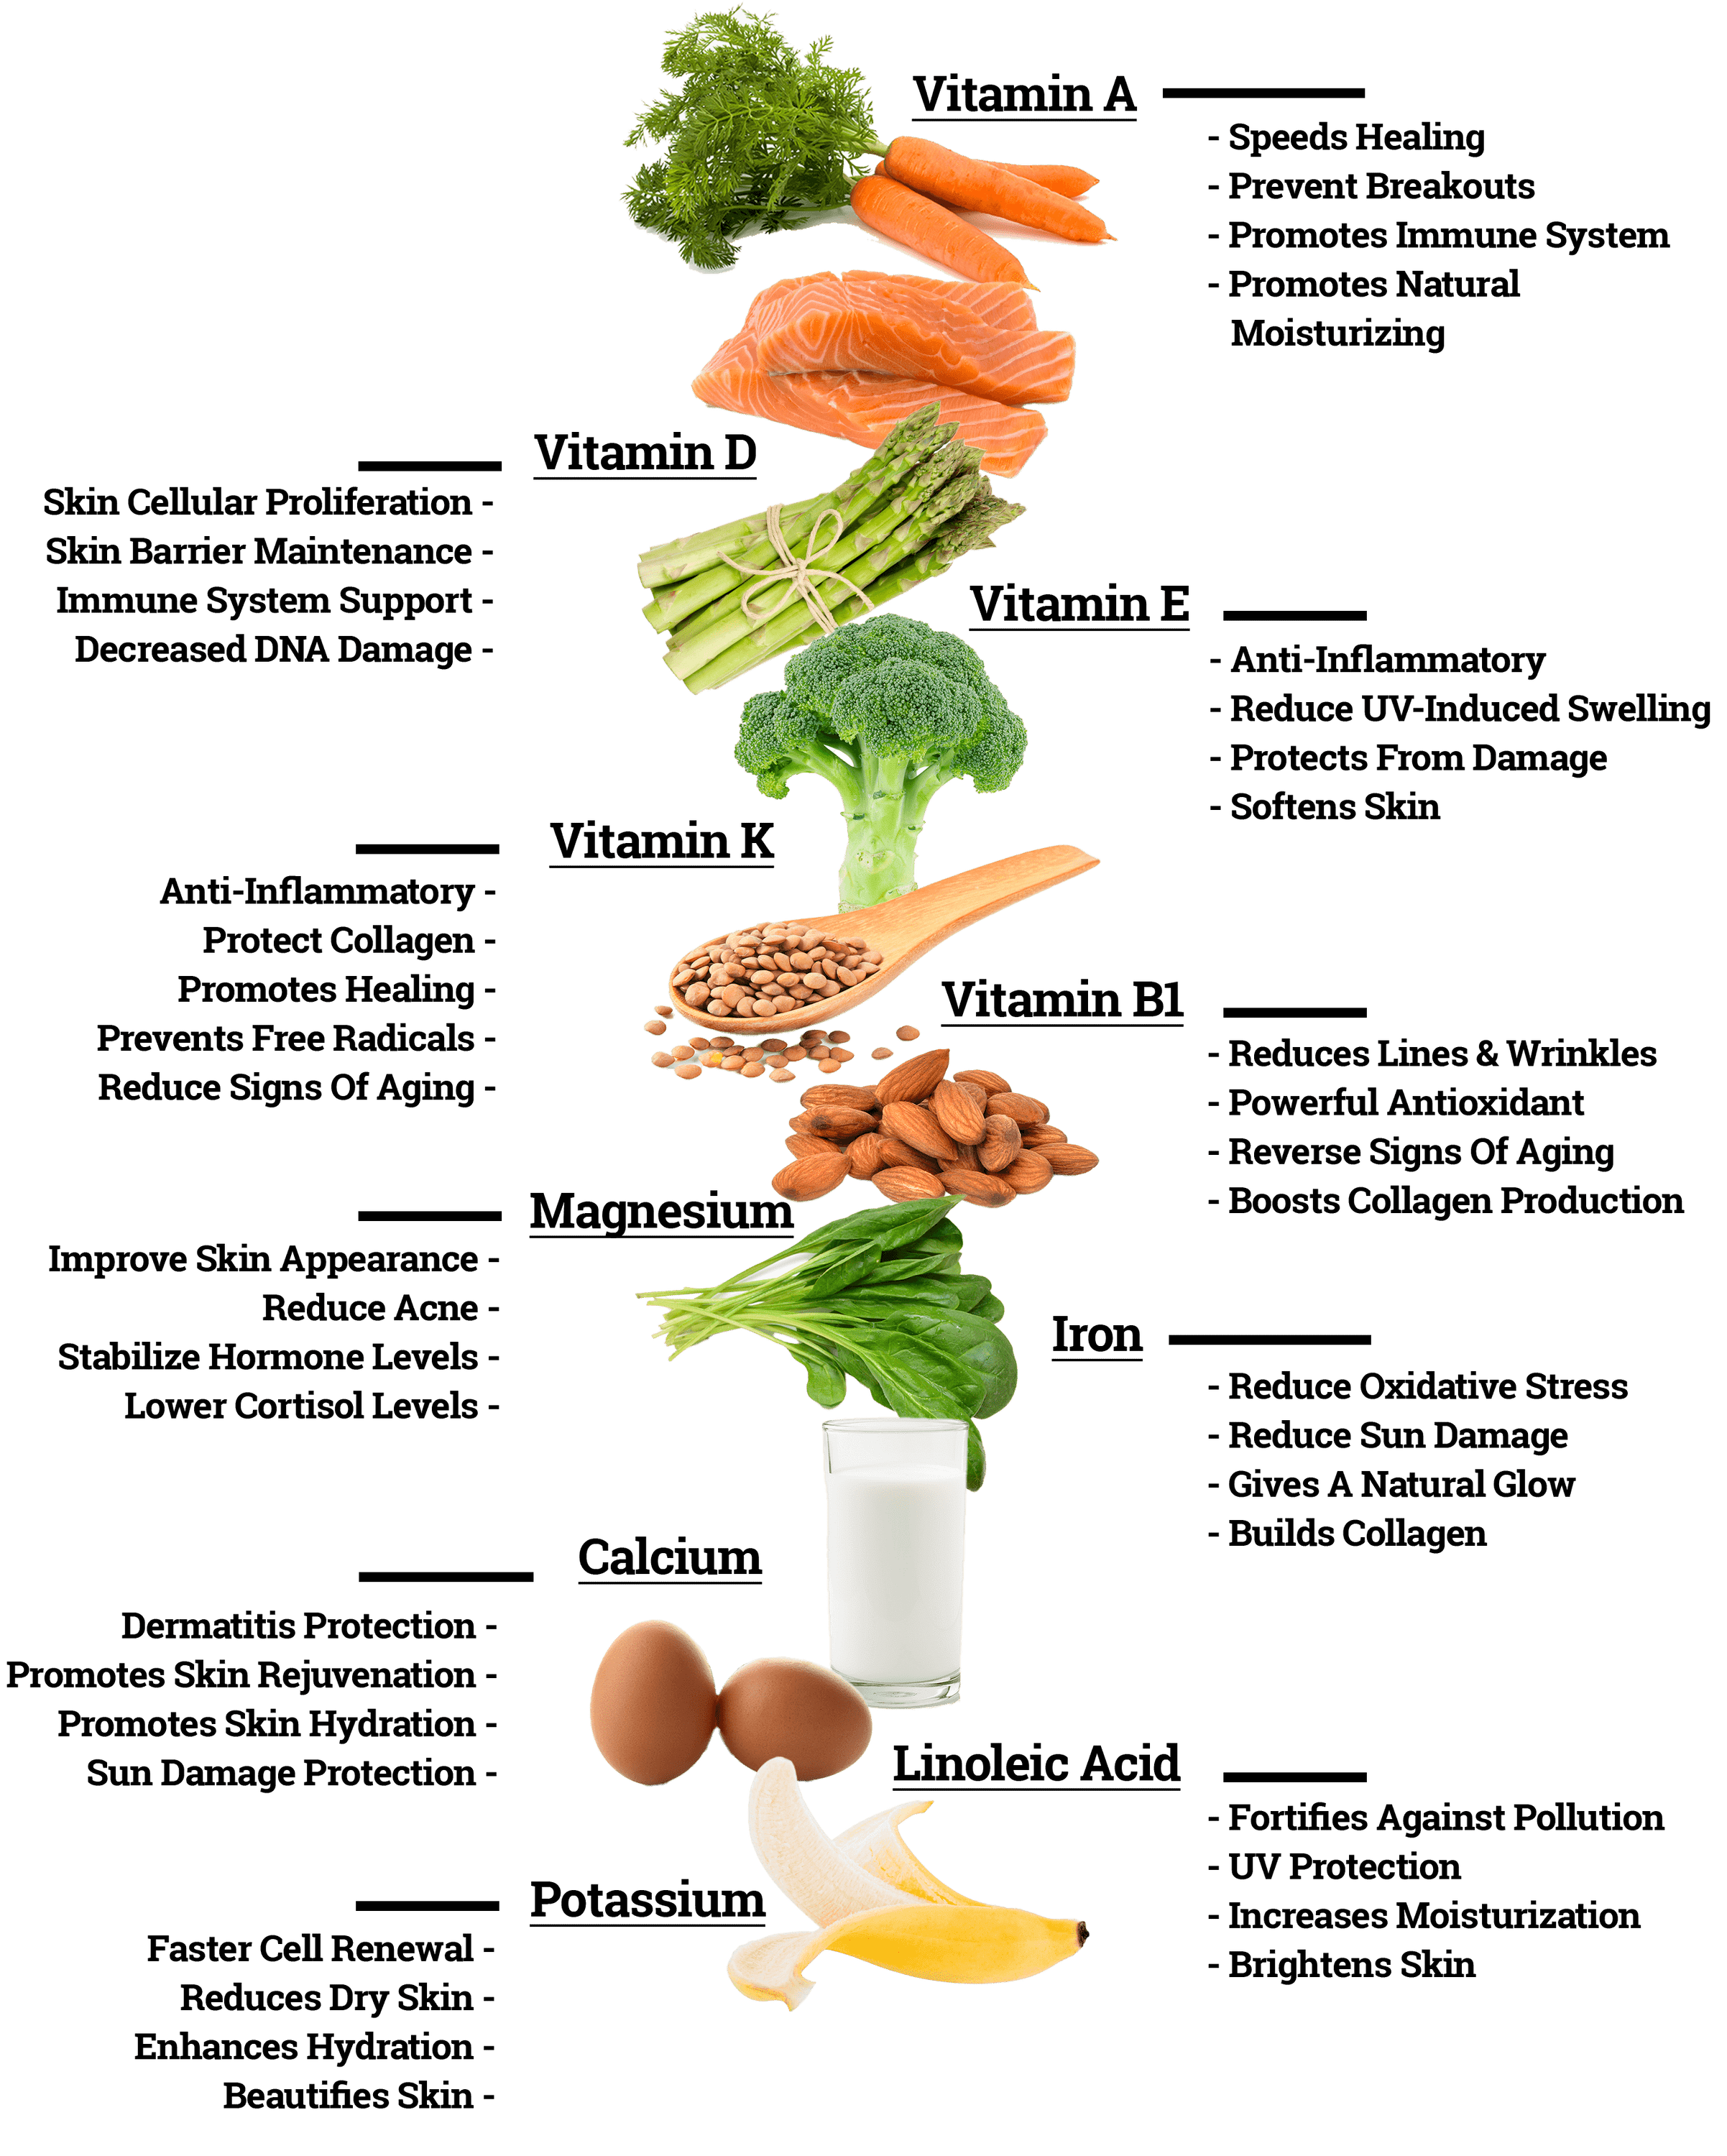 Image of the different types of vitamins and minerals found in Talló Balm as represented by other vegetables and foods